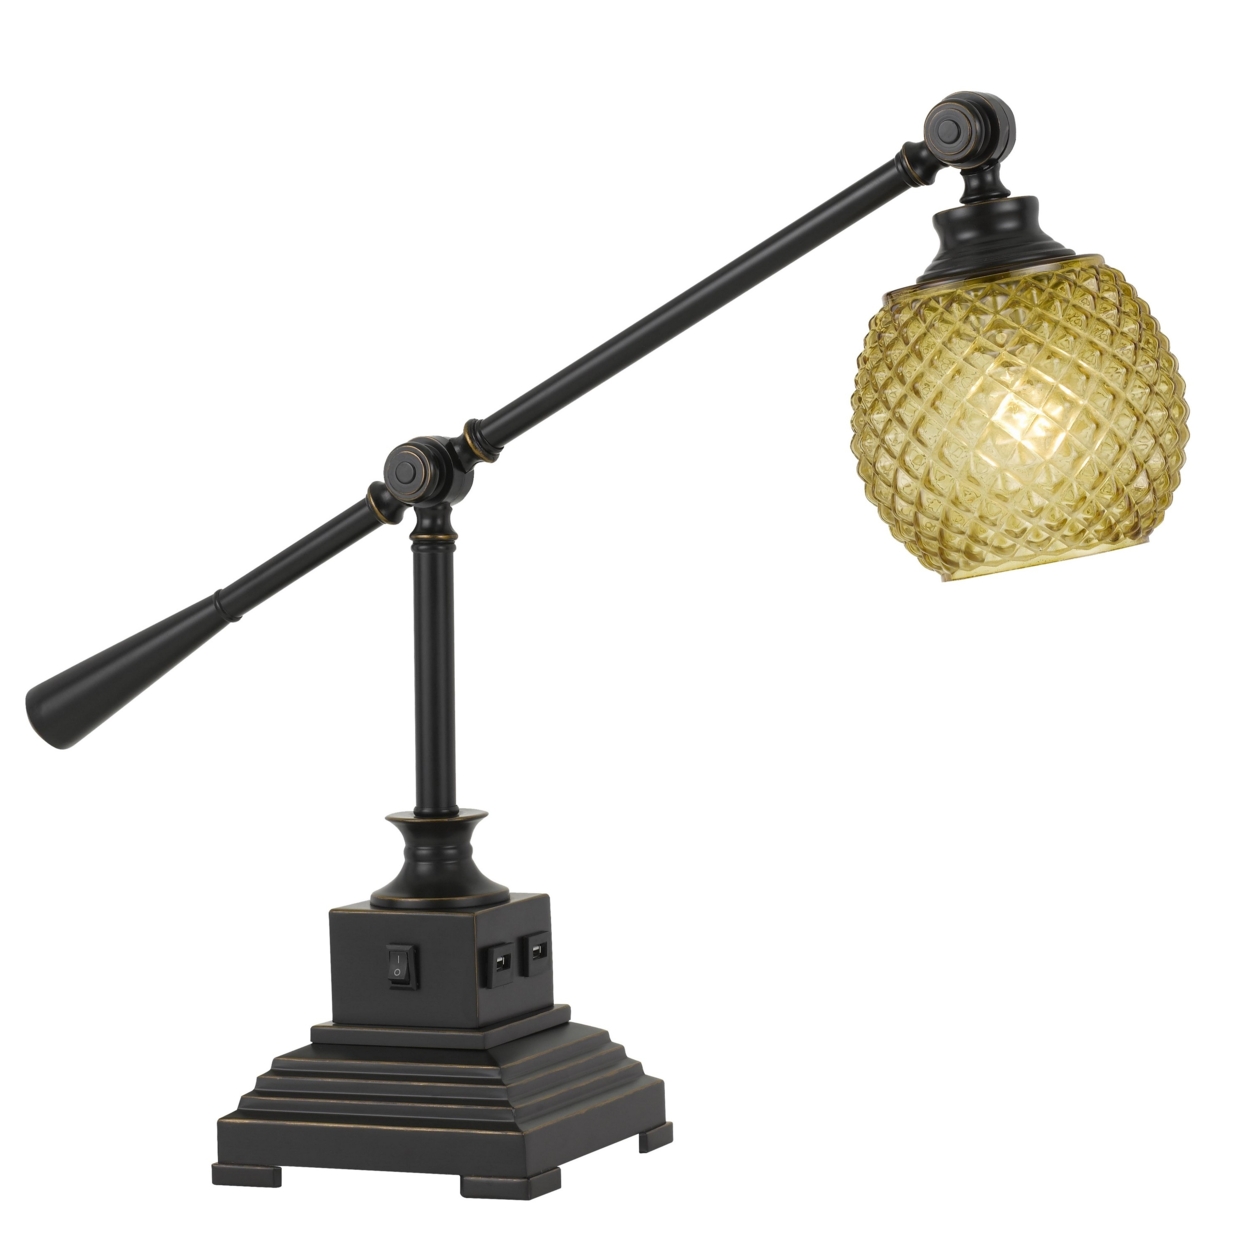 Glass Shade Metal Desk Lamp With 2 USB Outlets, Dark Bronze And Gold- Saltoro Sherpi